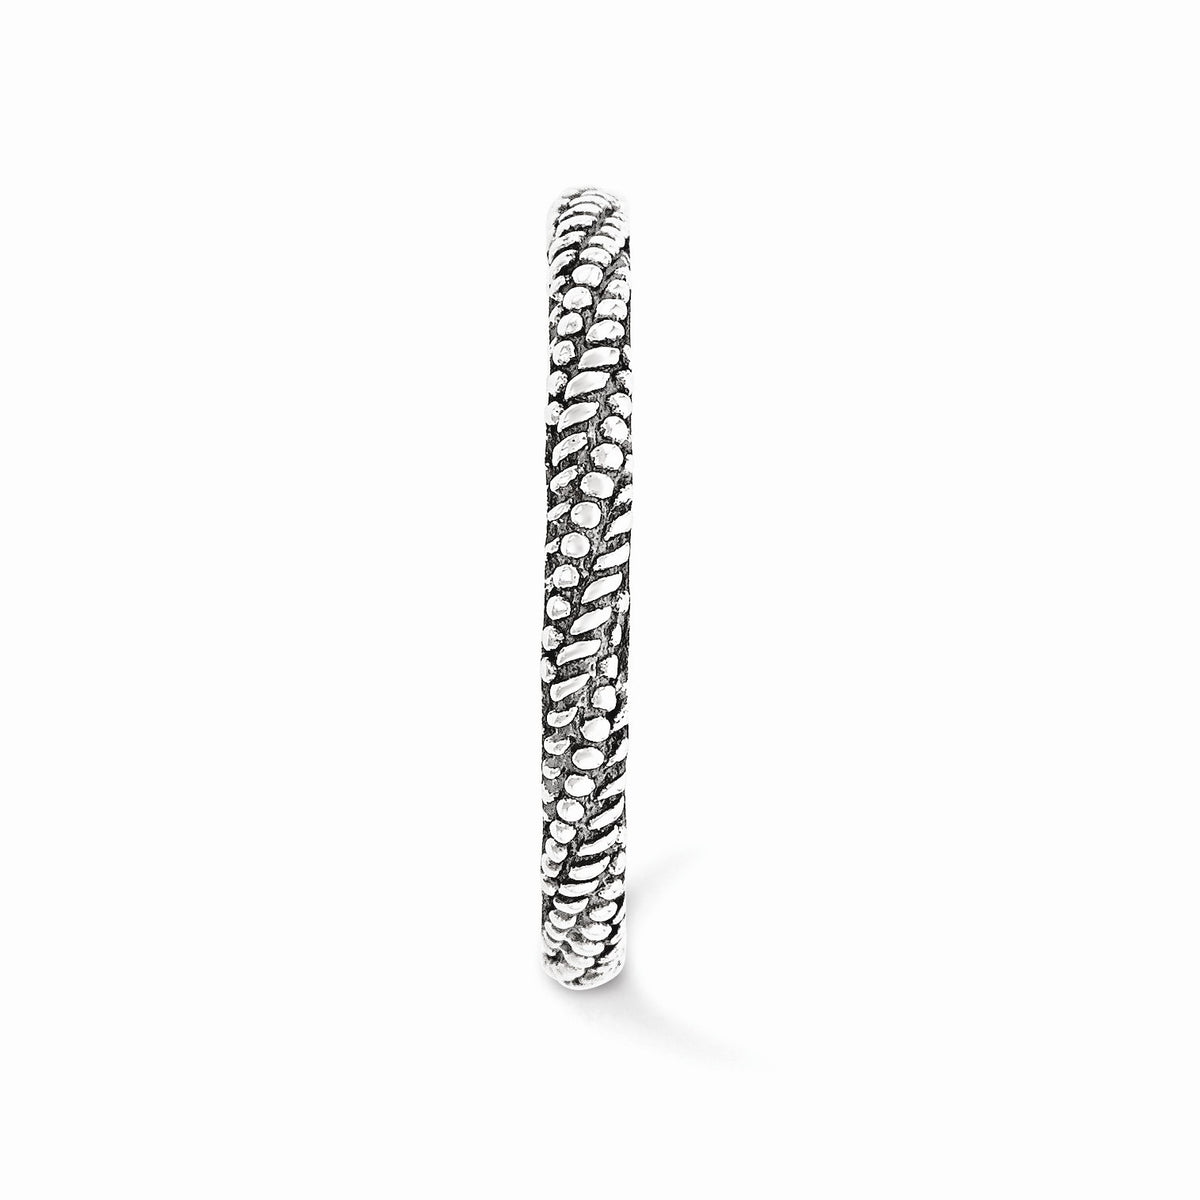 Alternate view of the 2.25mm Antiqued Sterling Silver Stackable Expressions Textured Band by The Black Bow Jewelry Co.